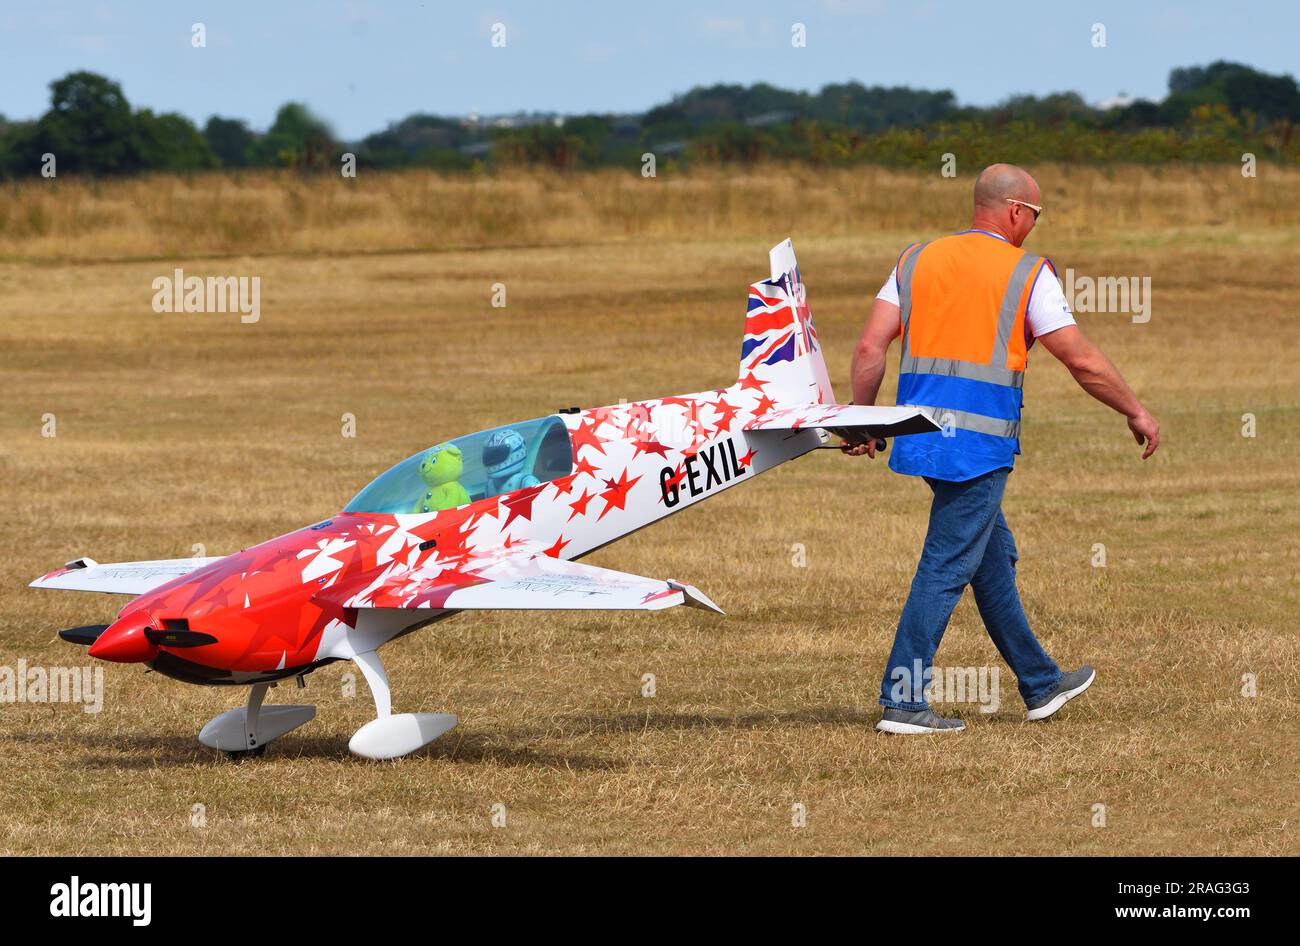 Large Radio Controlled aircraft being pulled accross airfield. Stock Photo